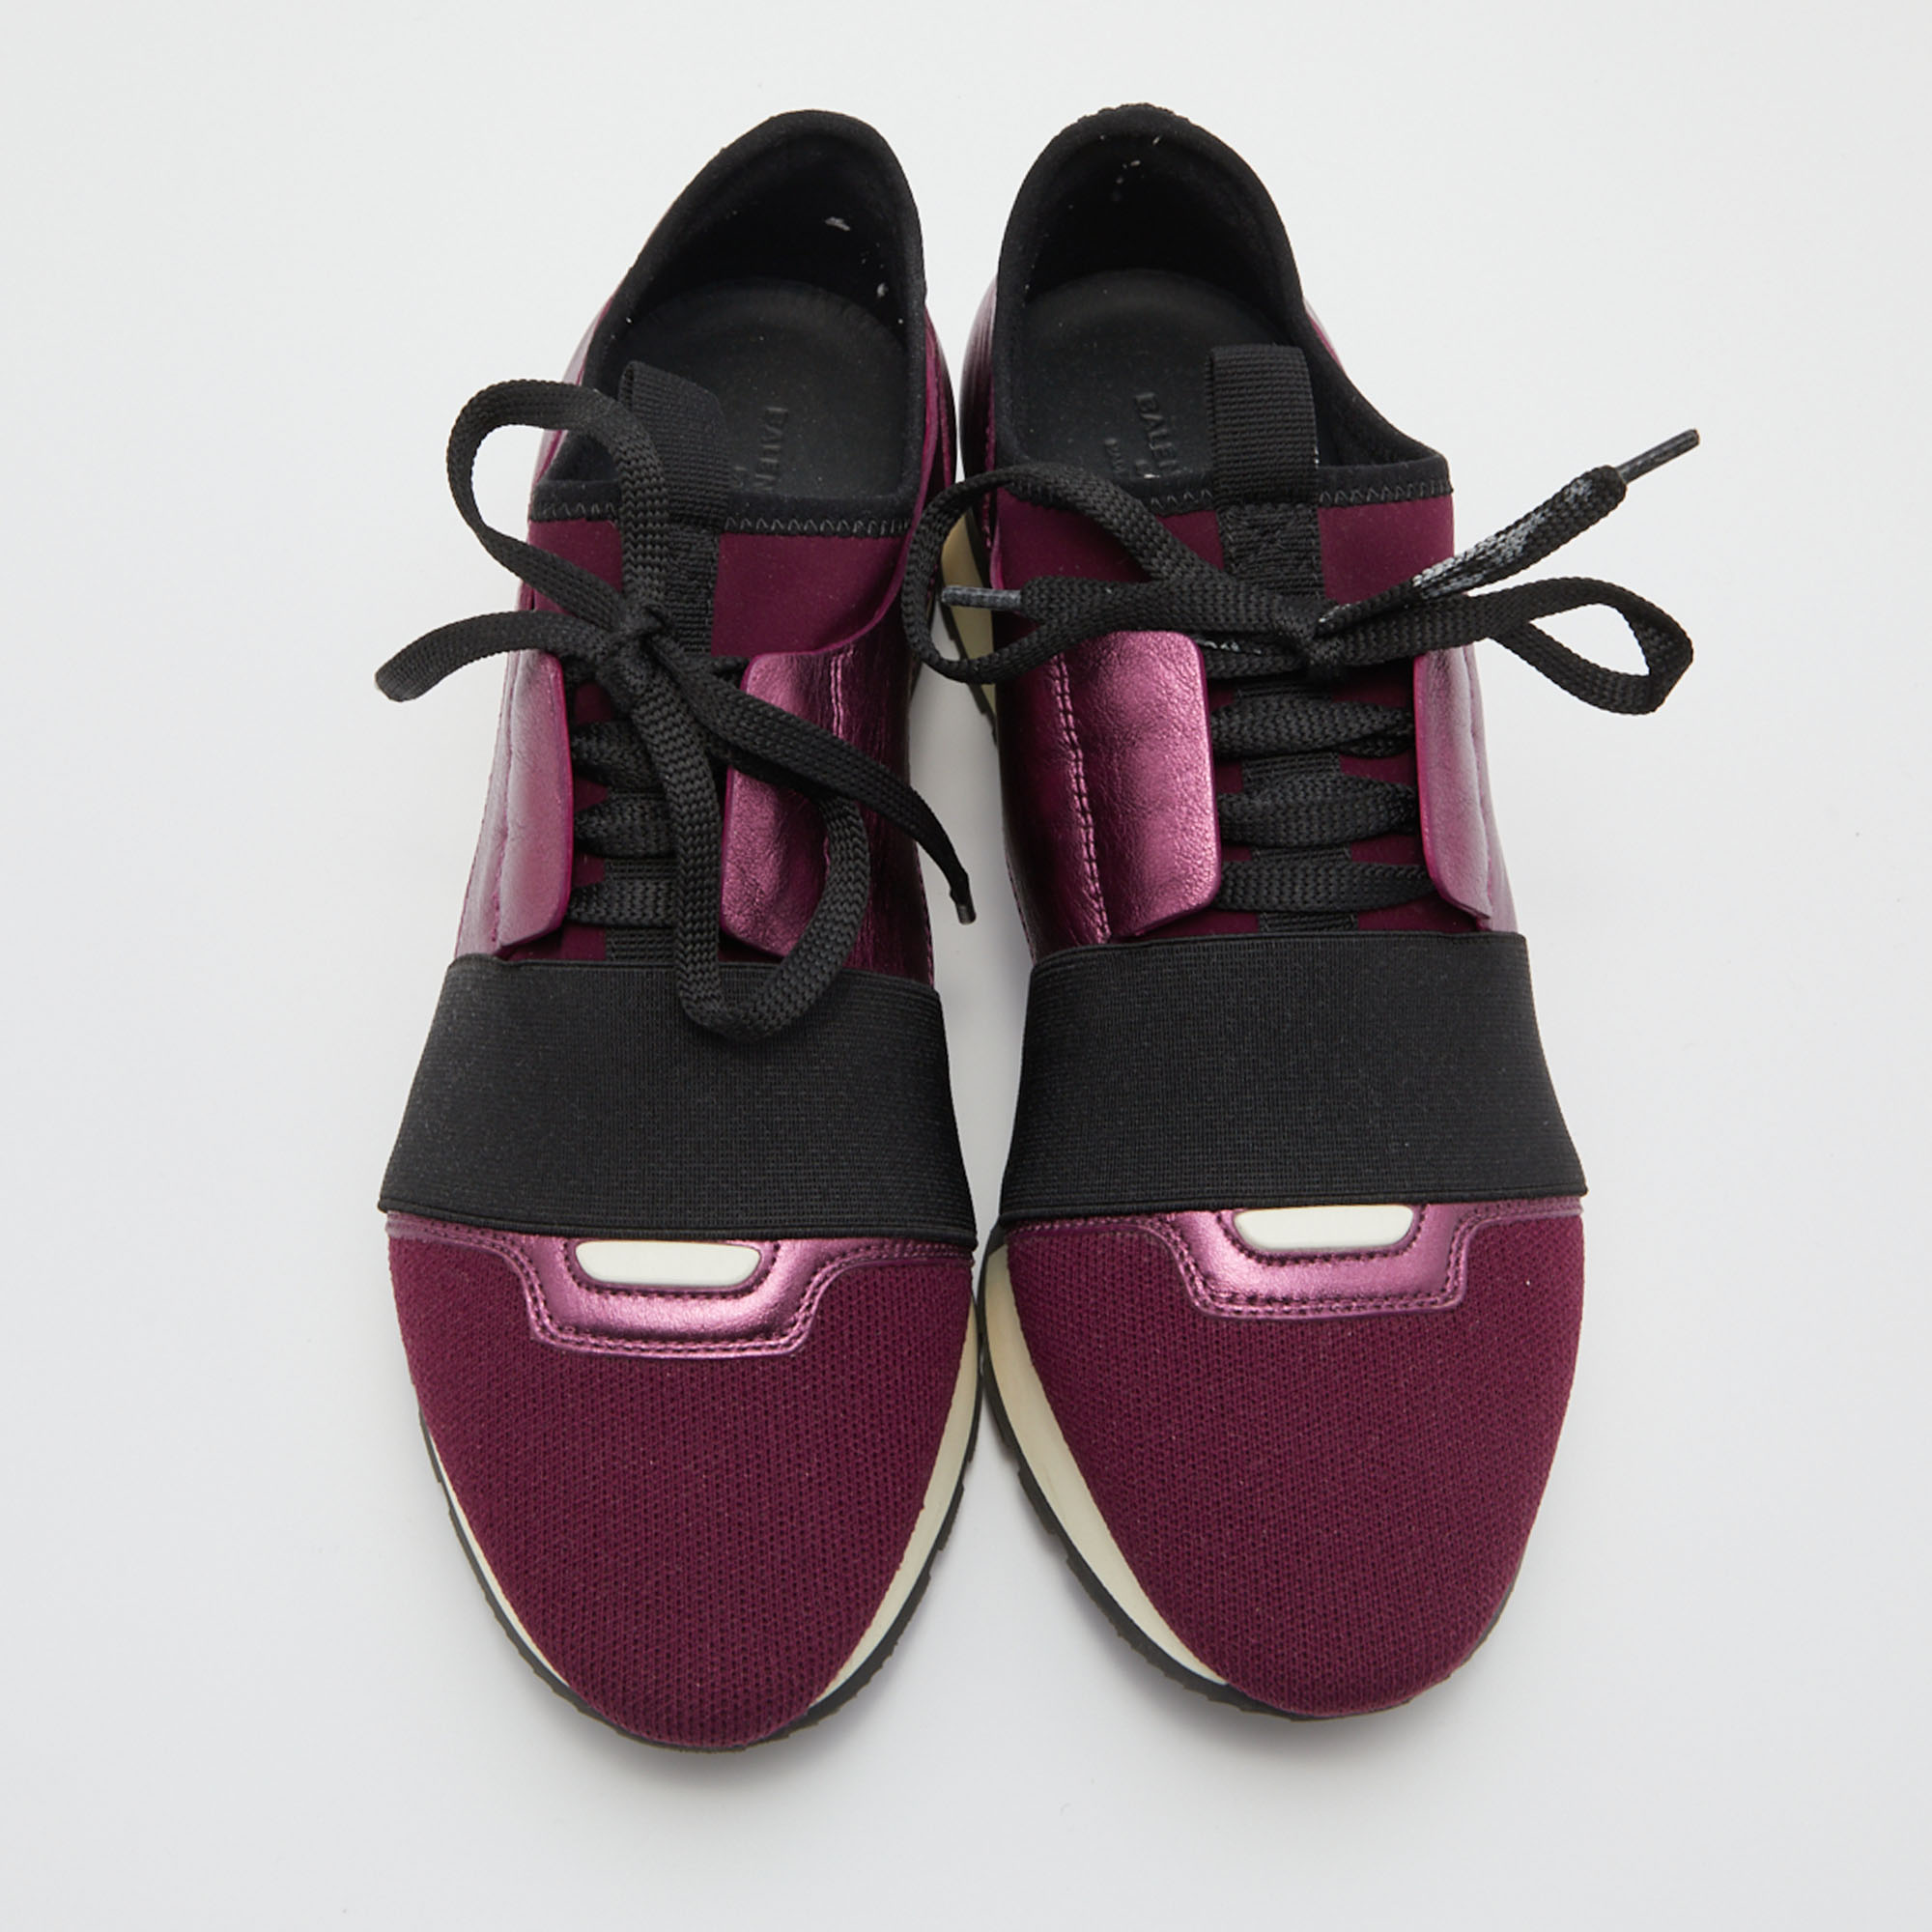 Balenciaga Plum/Black Leather And Stretch Fabric Race Runner Sneakers Size 38